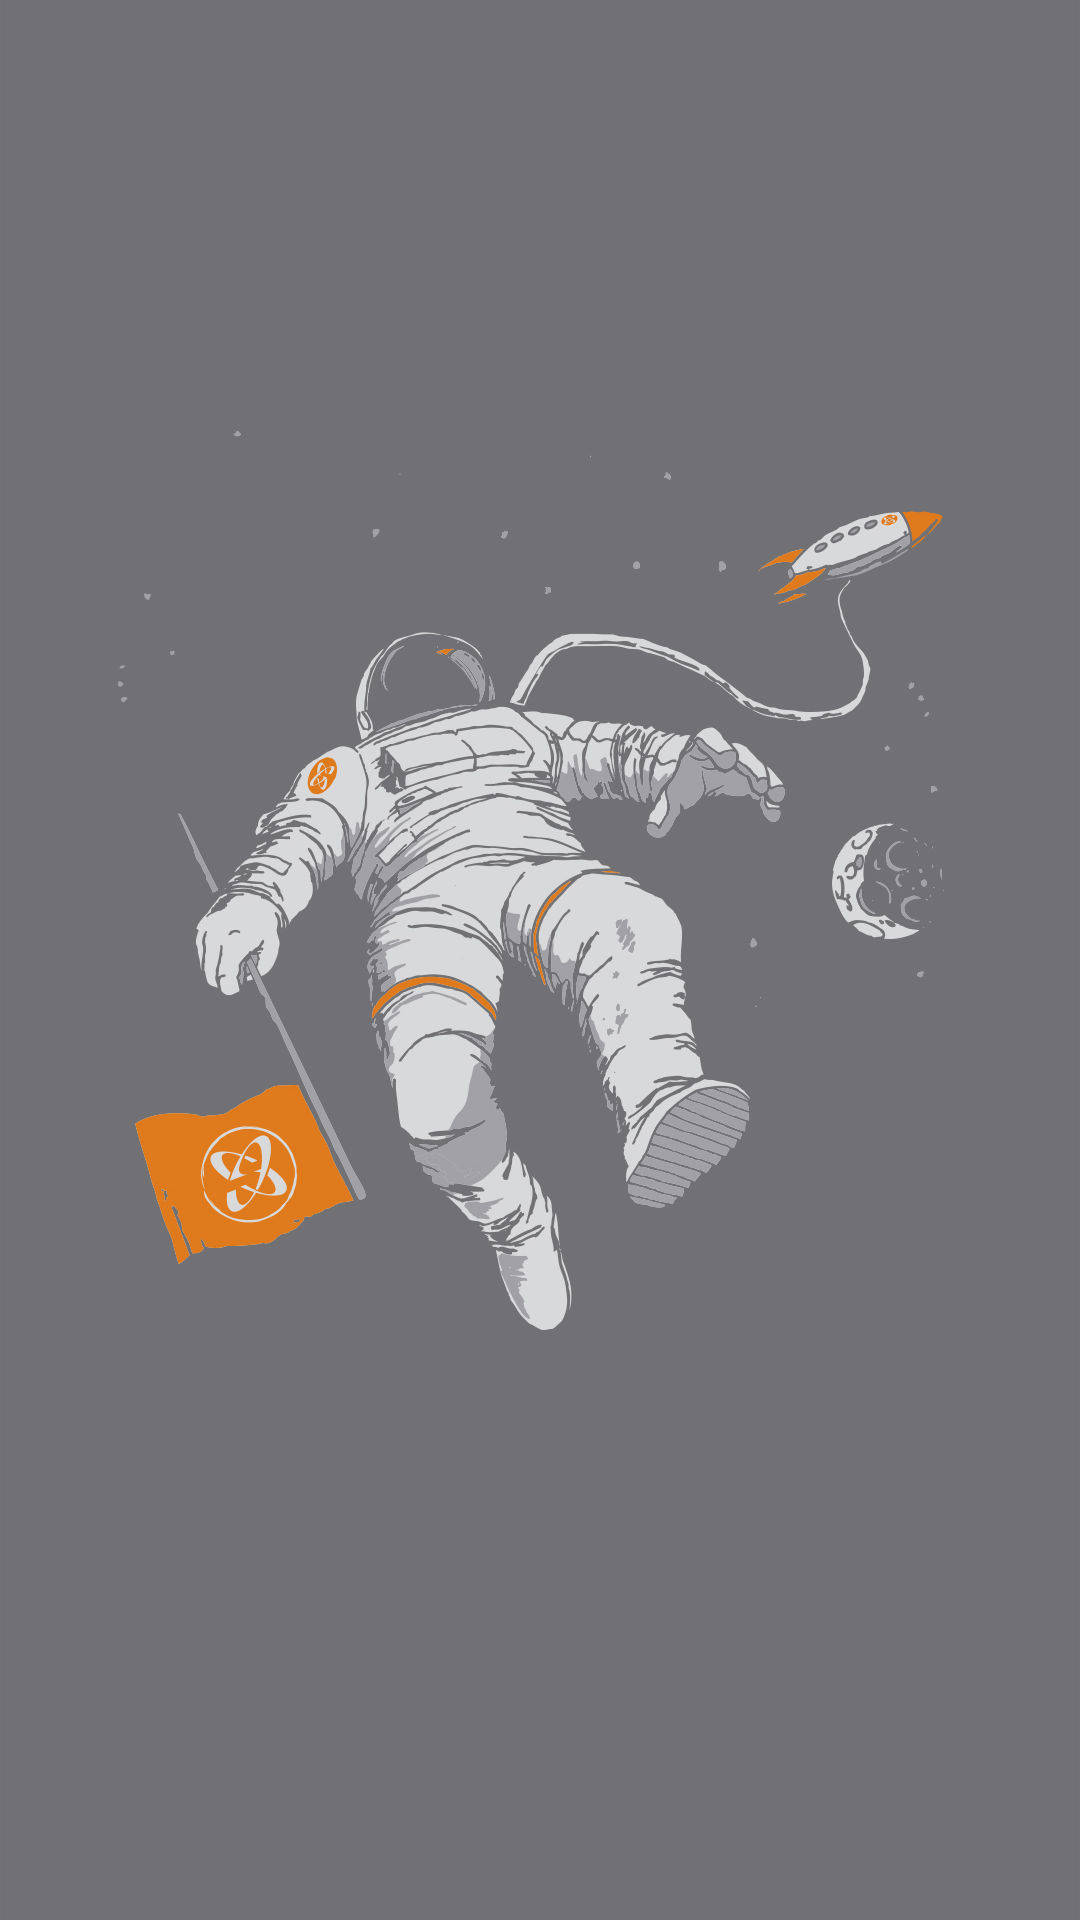 Astronaut In Gray Space